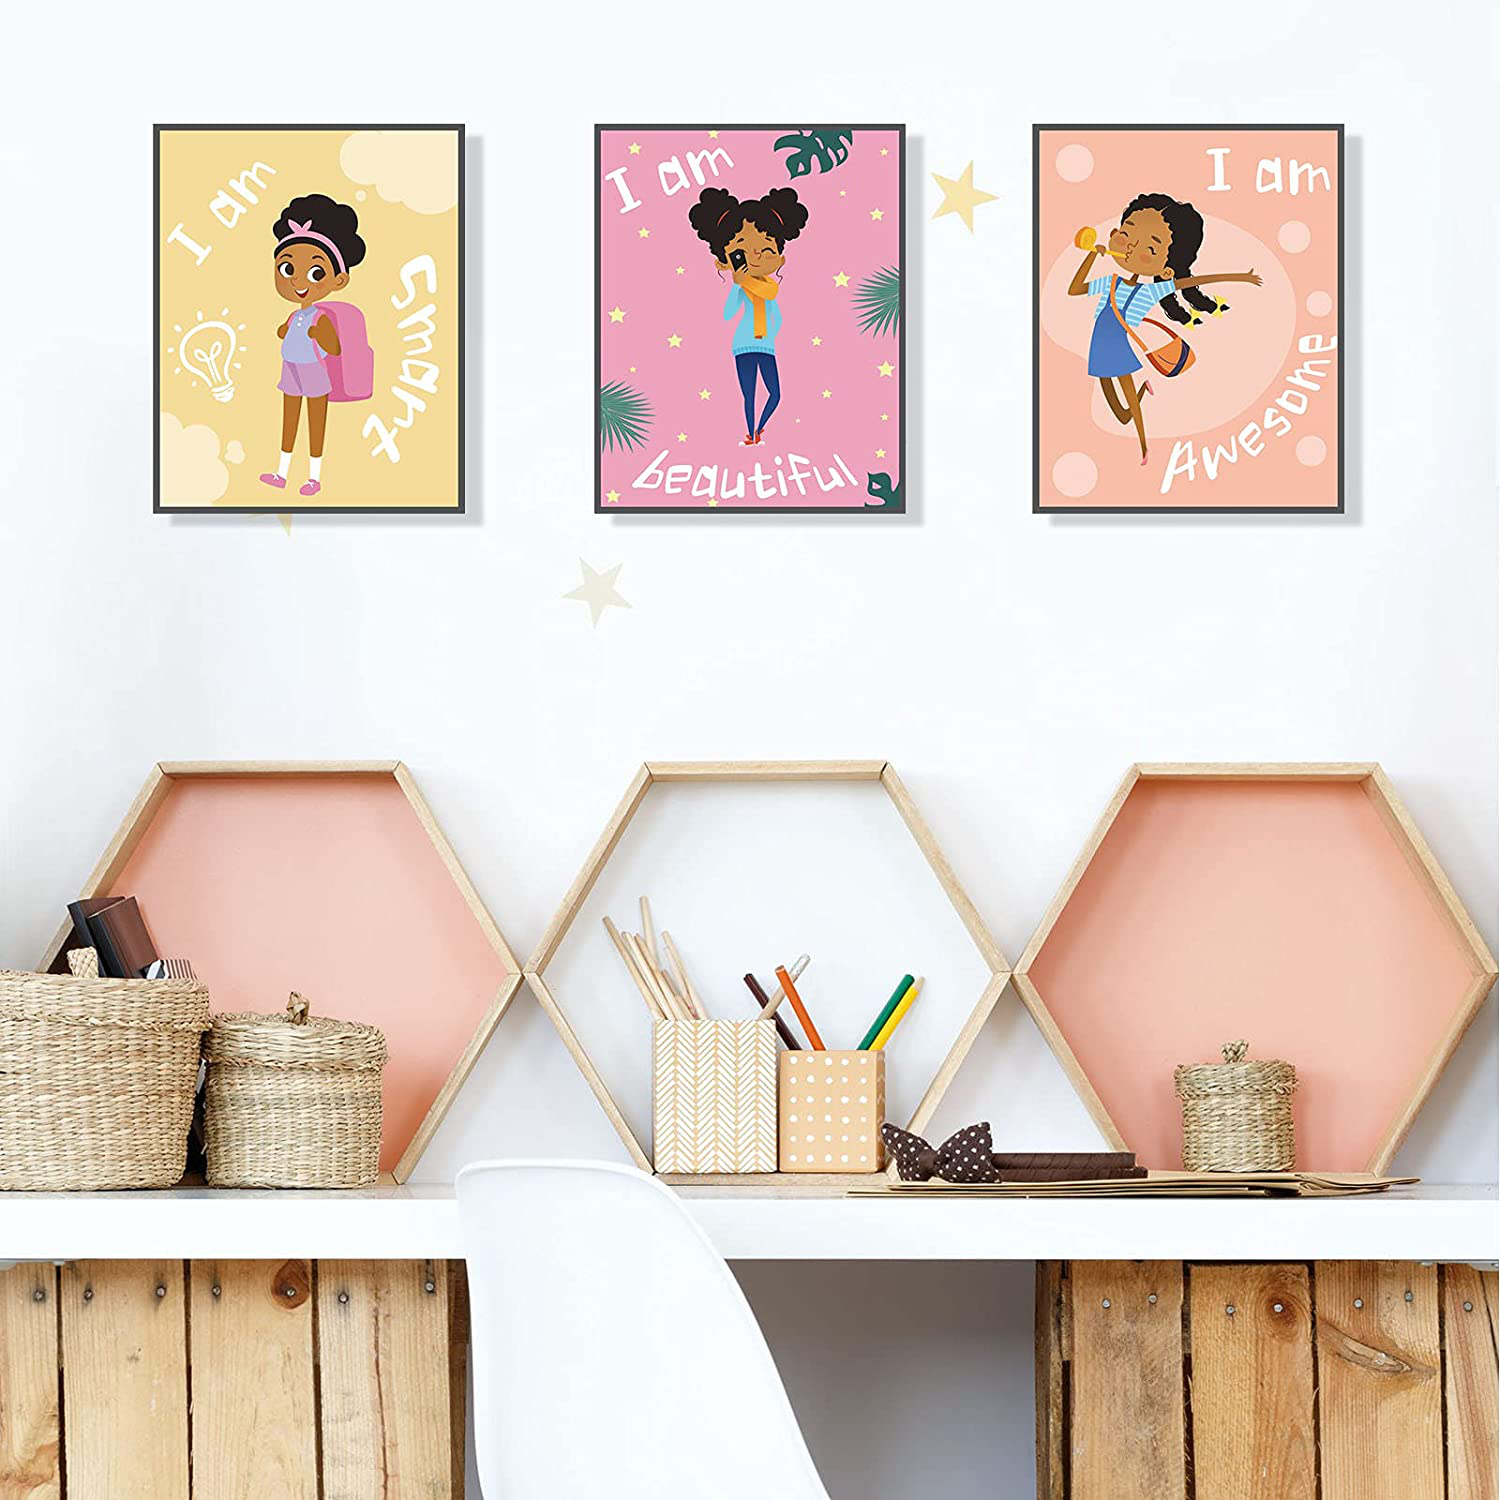 Outus 9 Pieces Girls Room Decor Black Girl Wall Painting Art Decor Motivational Black Girl Posters Girls Bedroom Motivational Art Paint for Kids Teen Girls Room Wall Decorations,Unframed, 8 x 10 Inch